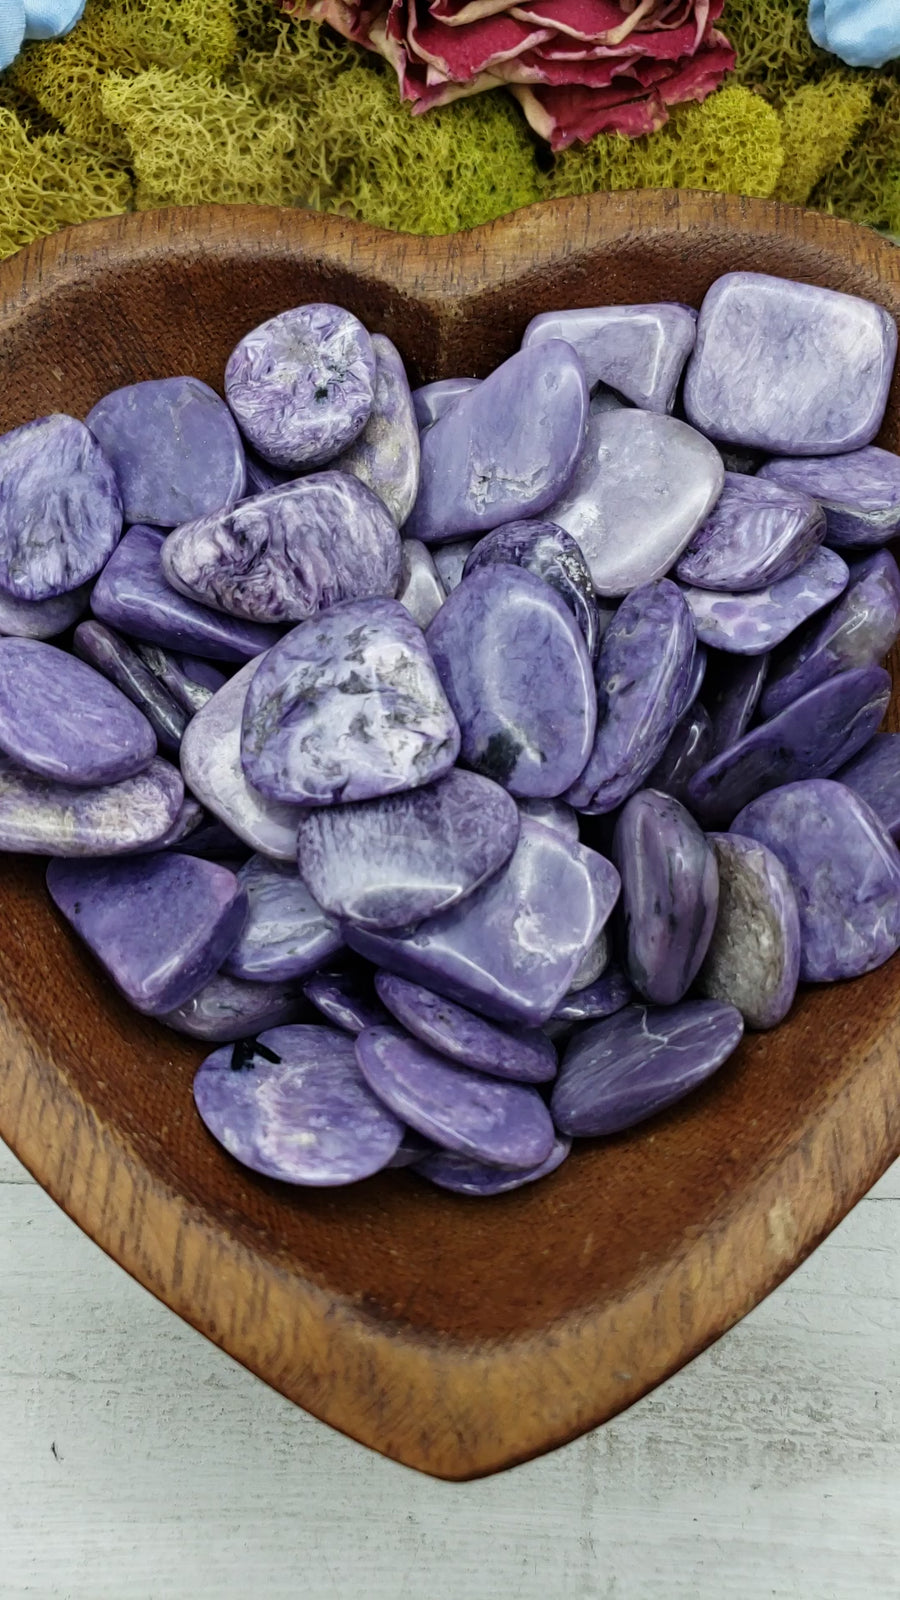 Charoite stones in heart-shaped bowl